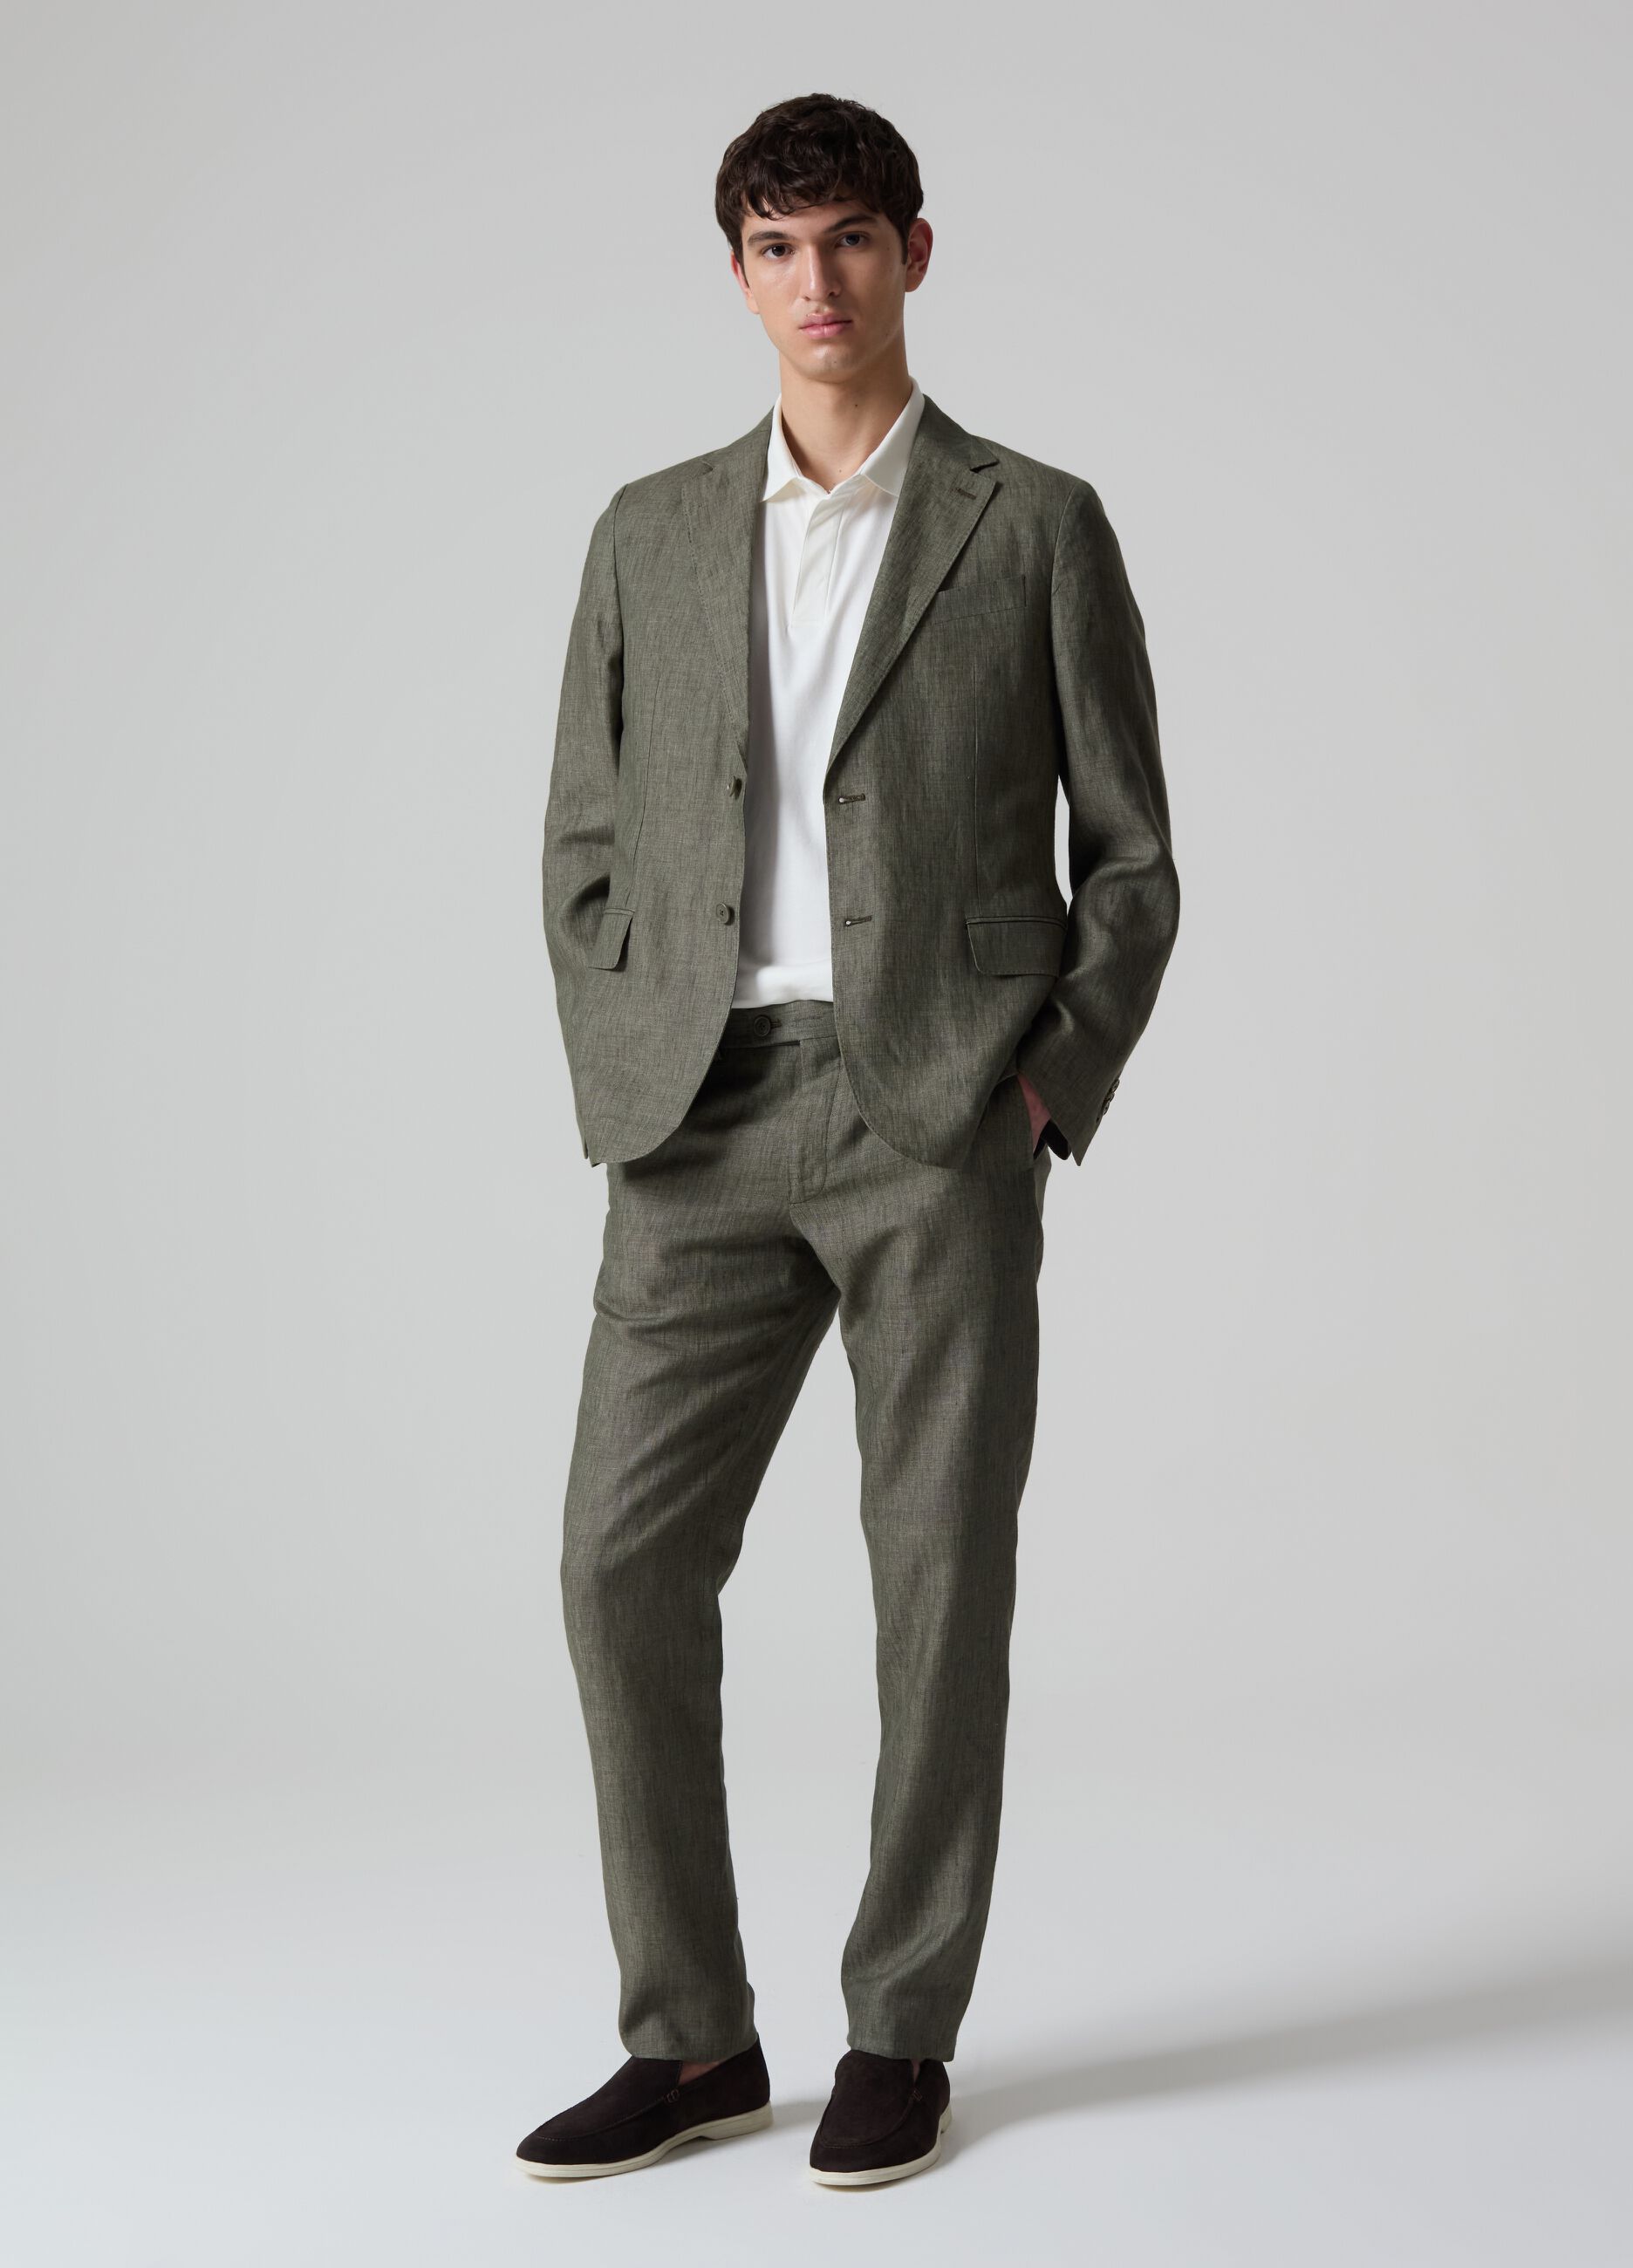 Contemporary chino trousers in linen